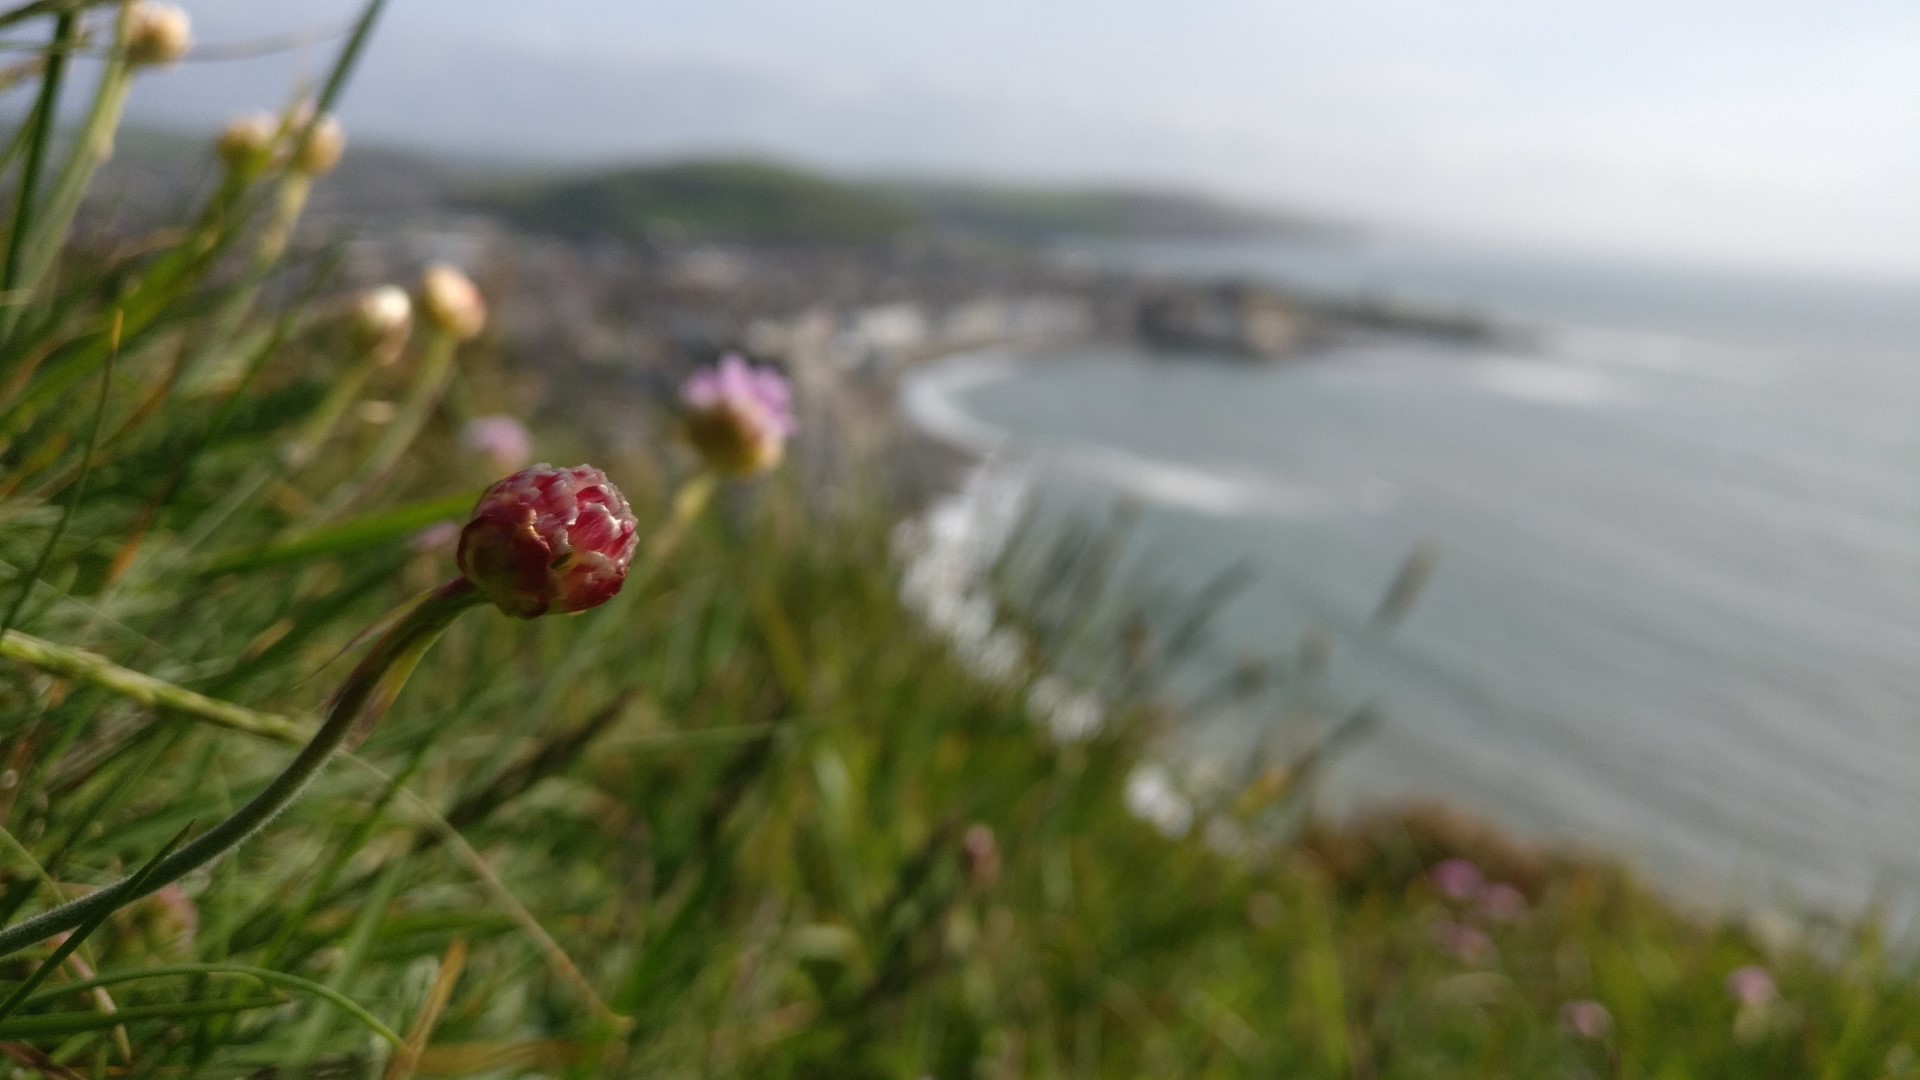 Photograph of a flower in the grass above a seaside town.